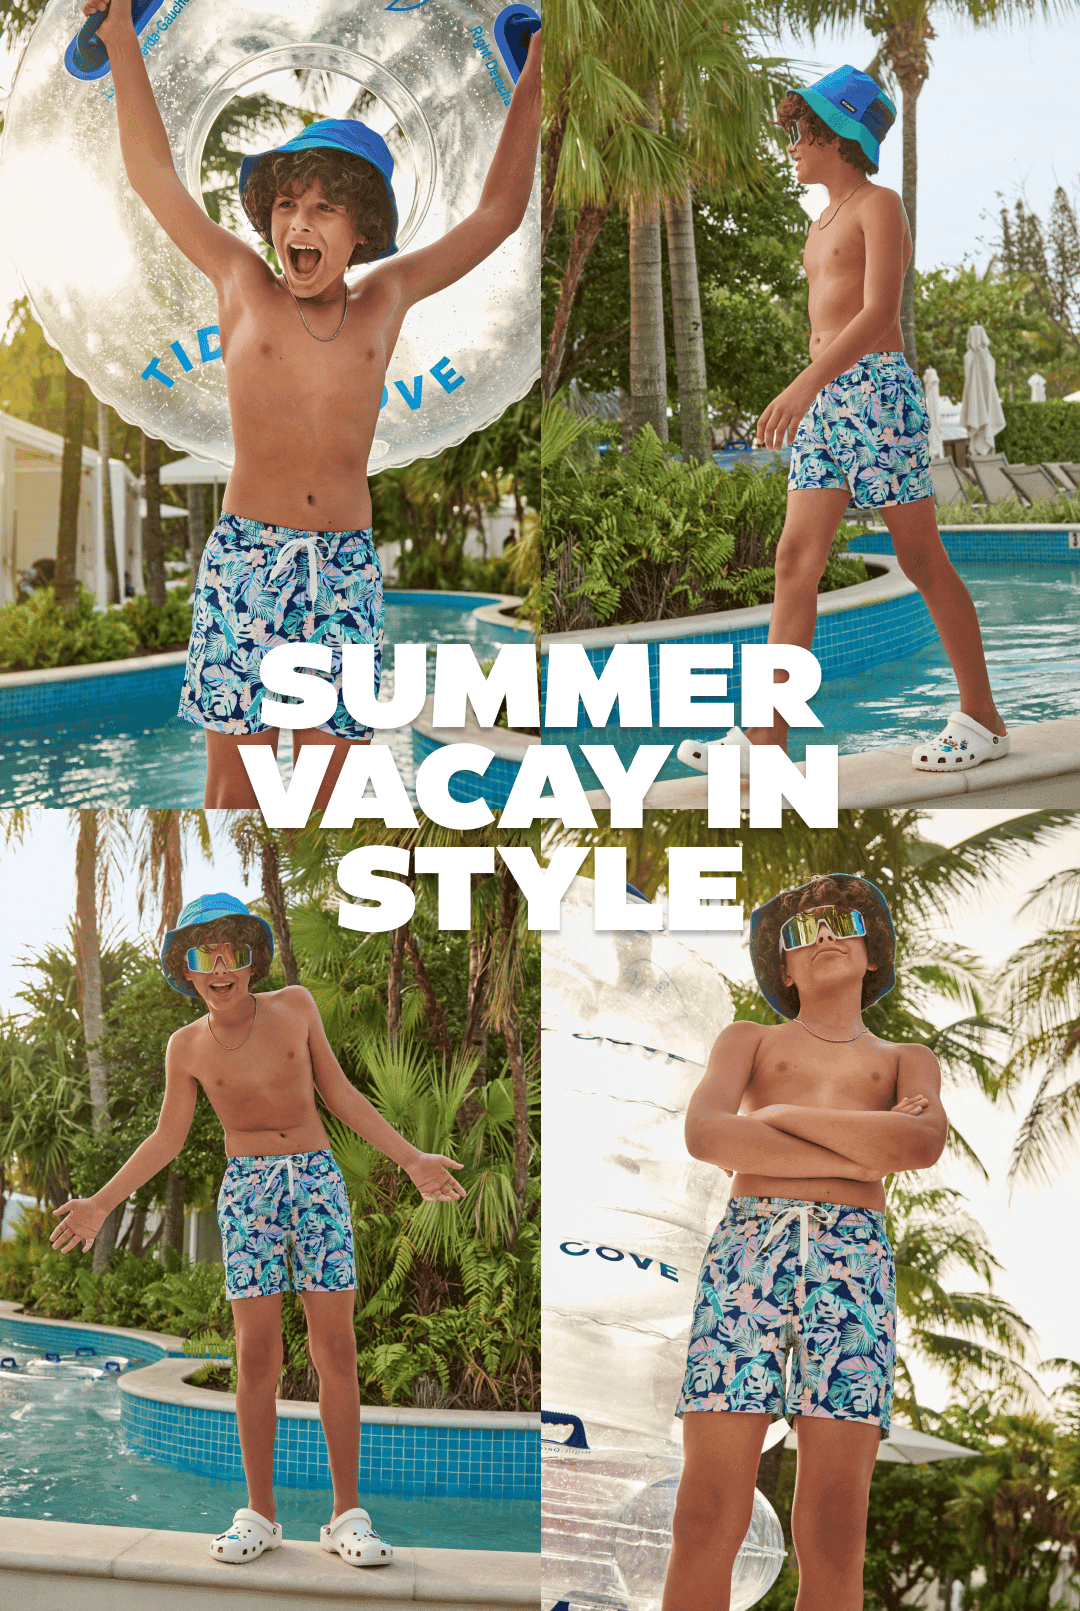 SUMMER VACAY IN STYLE